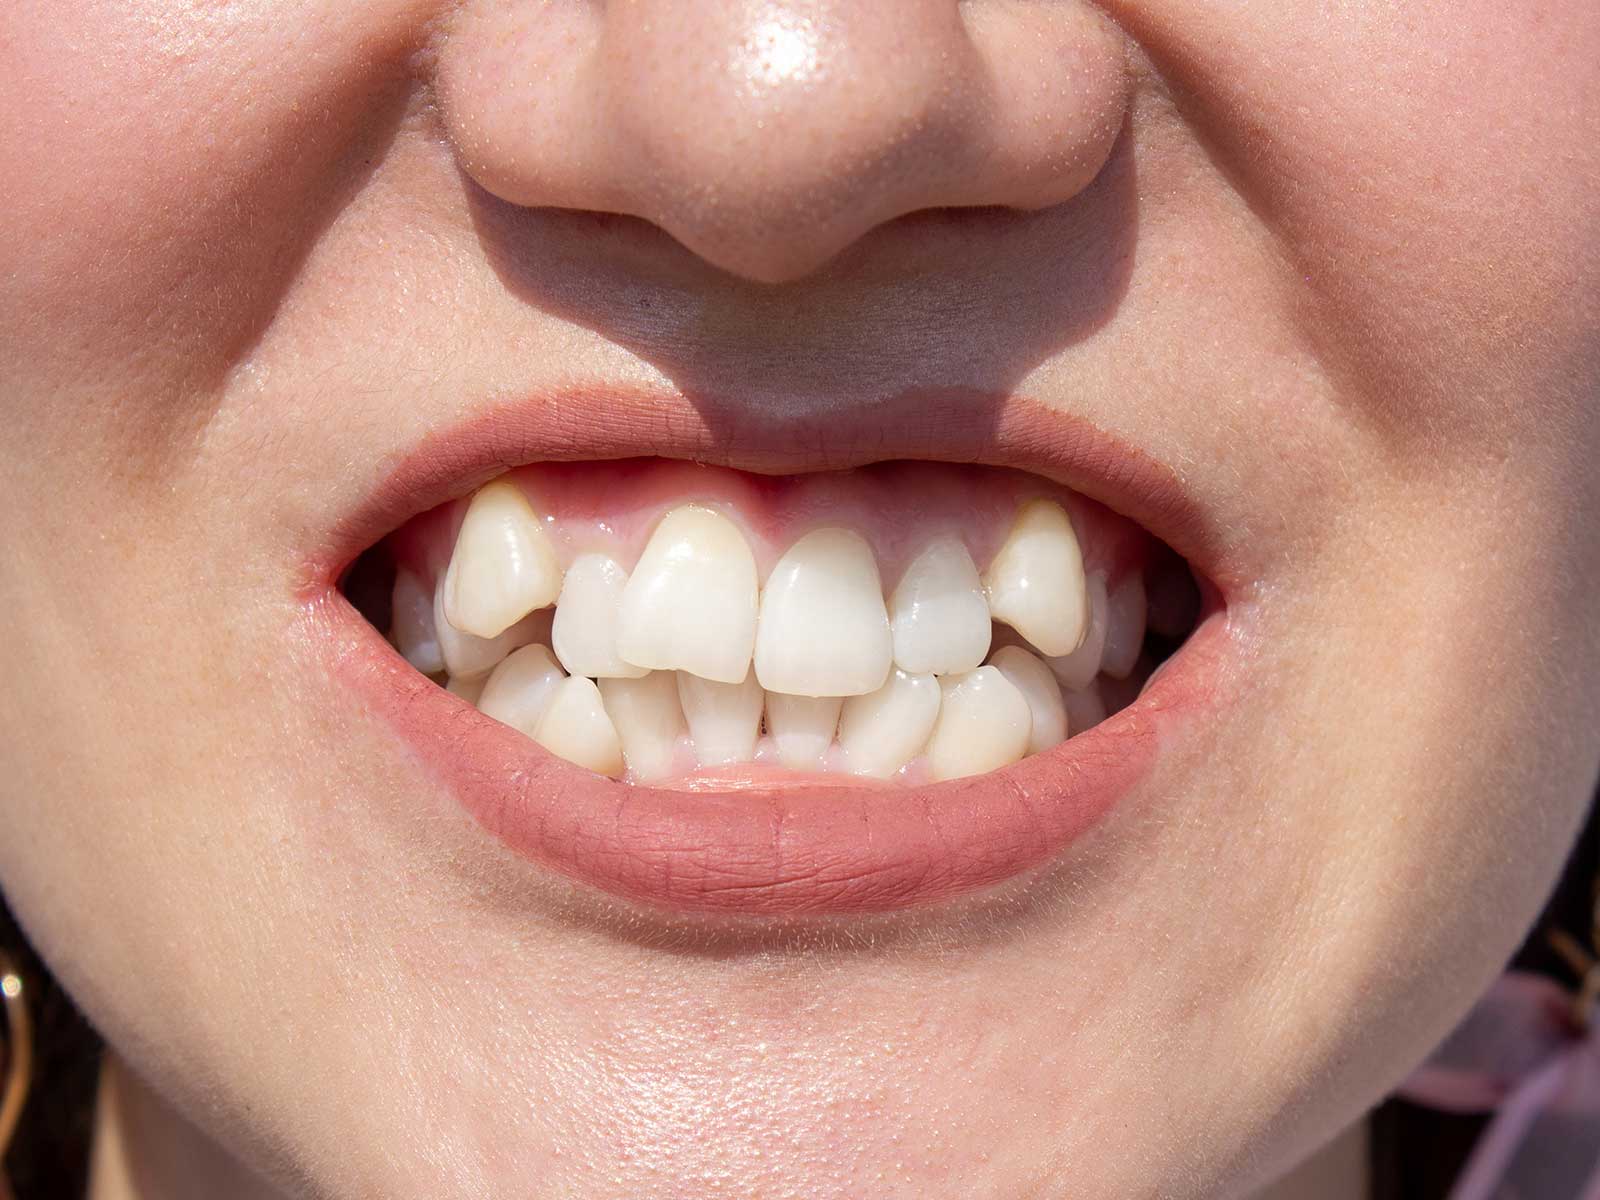 What causes overlapping of teeth?